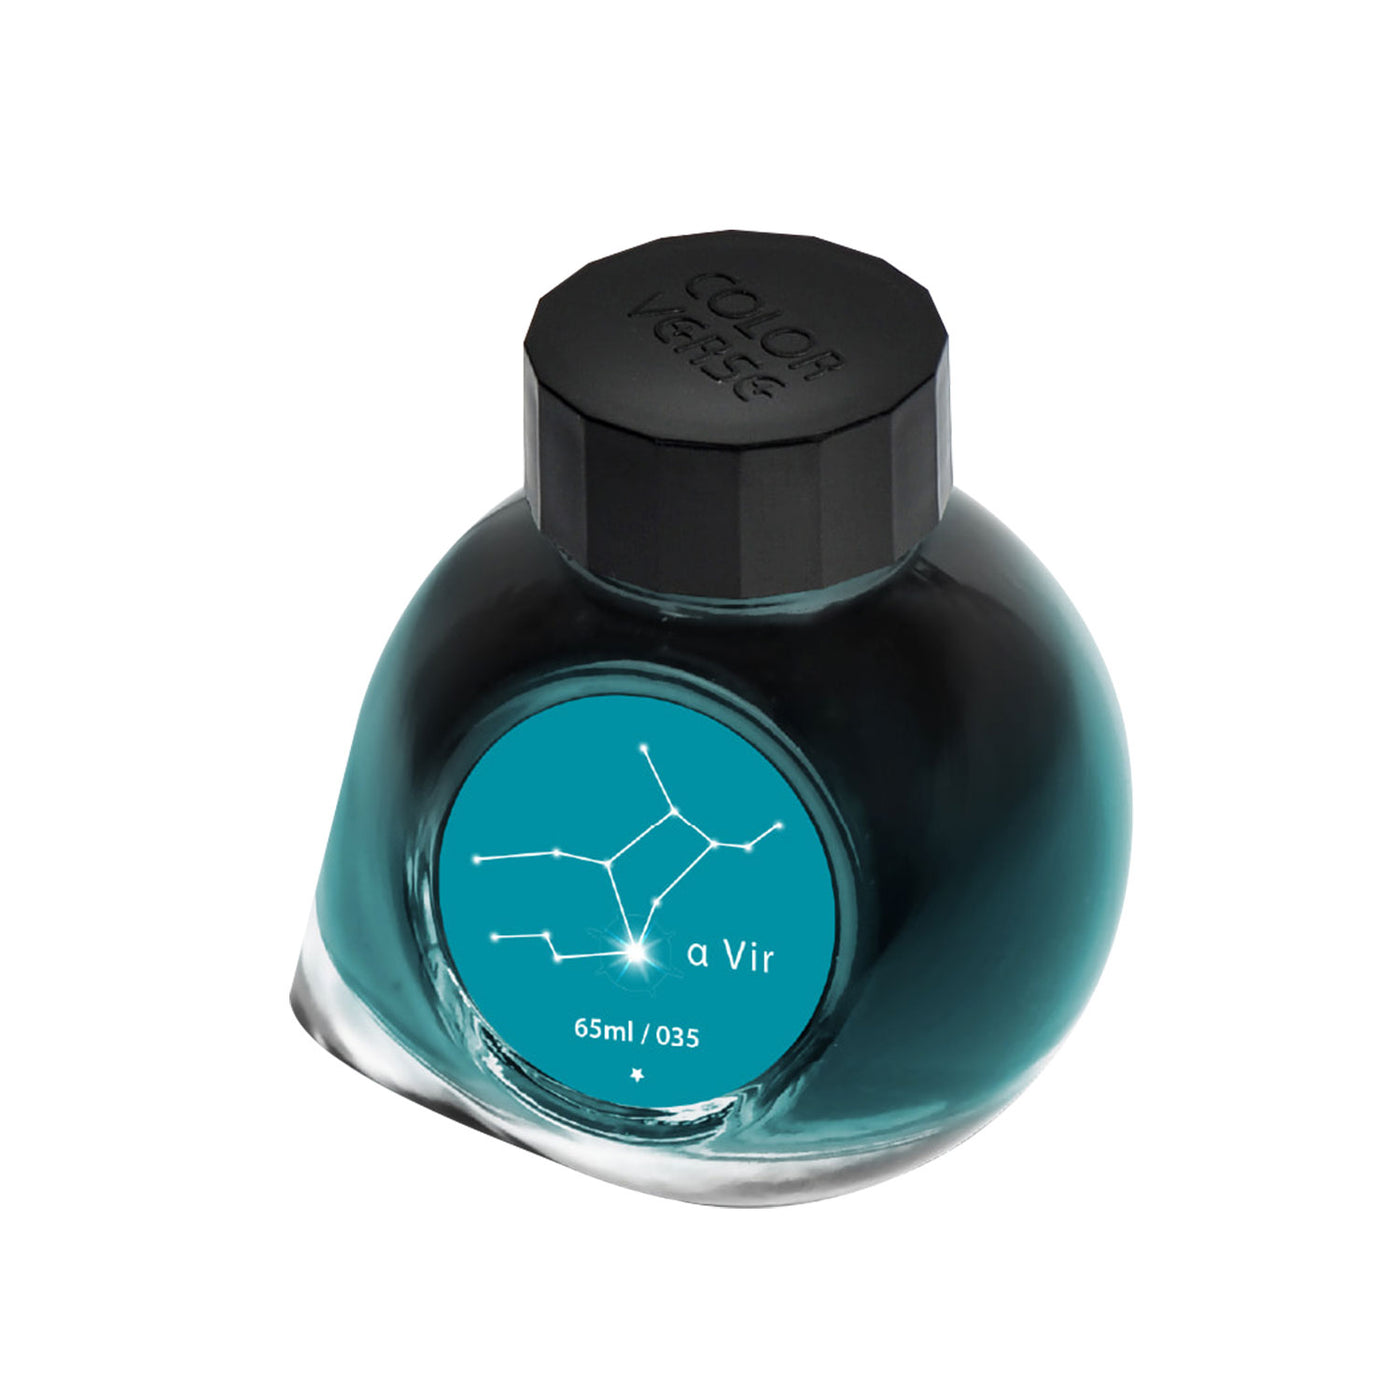 Colorverse Project Constellation II α Vir Ink Bottle, Turquoise - 65ml